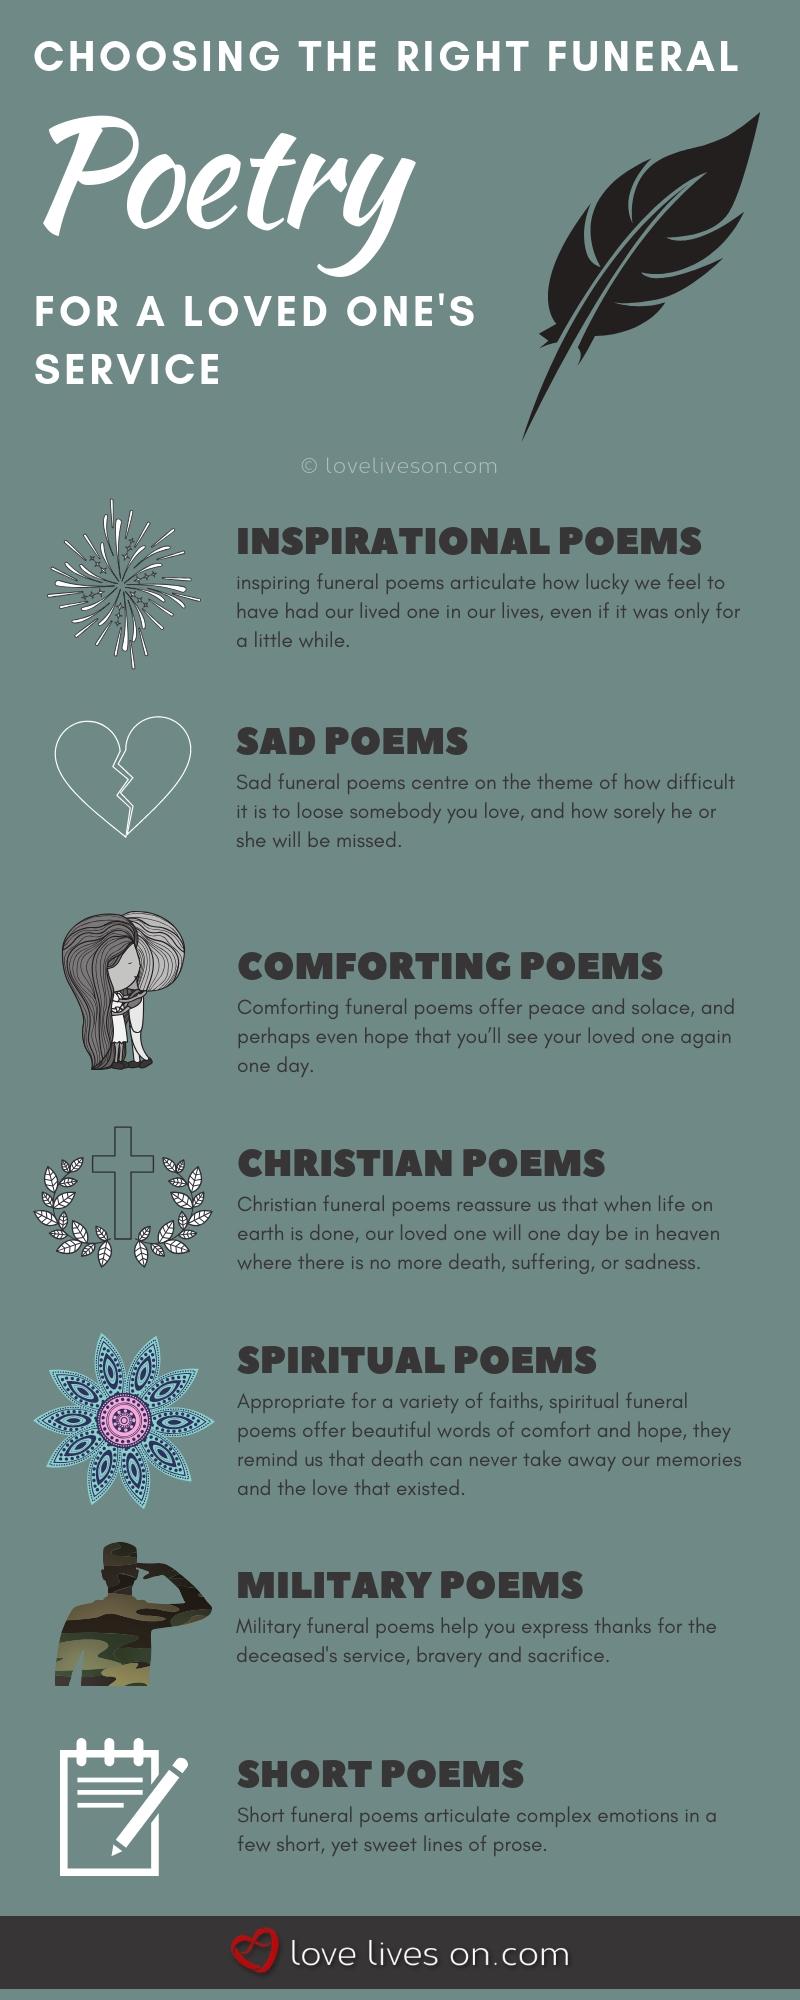 SOM IMG PIN Infographic Funeral Poems 10 2018